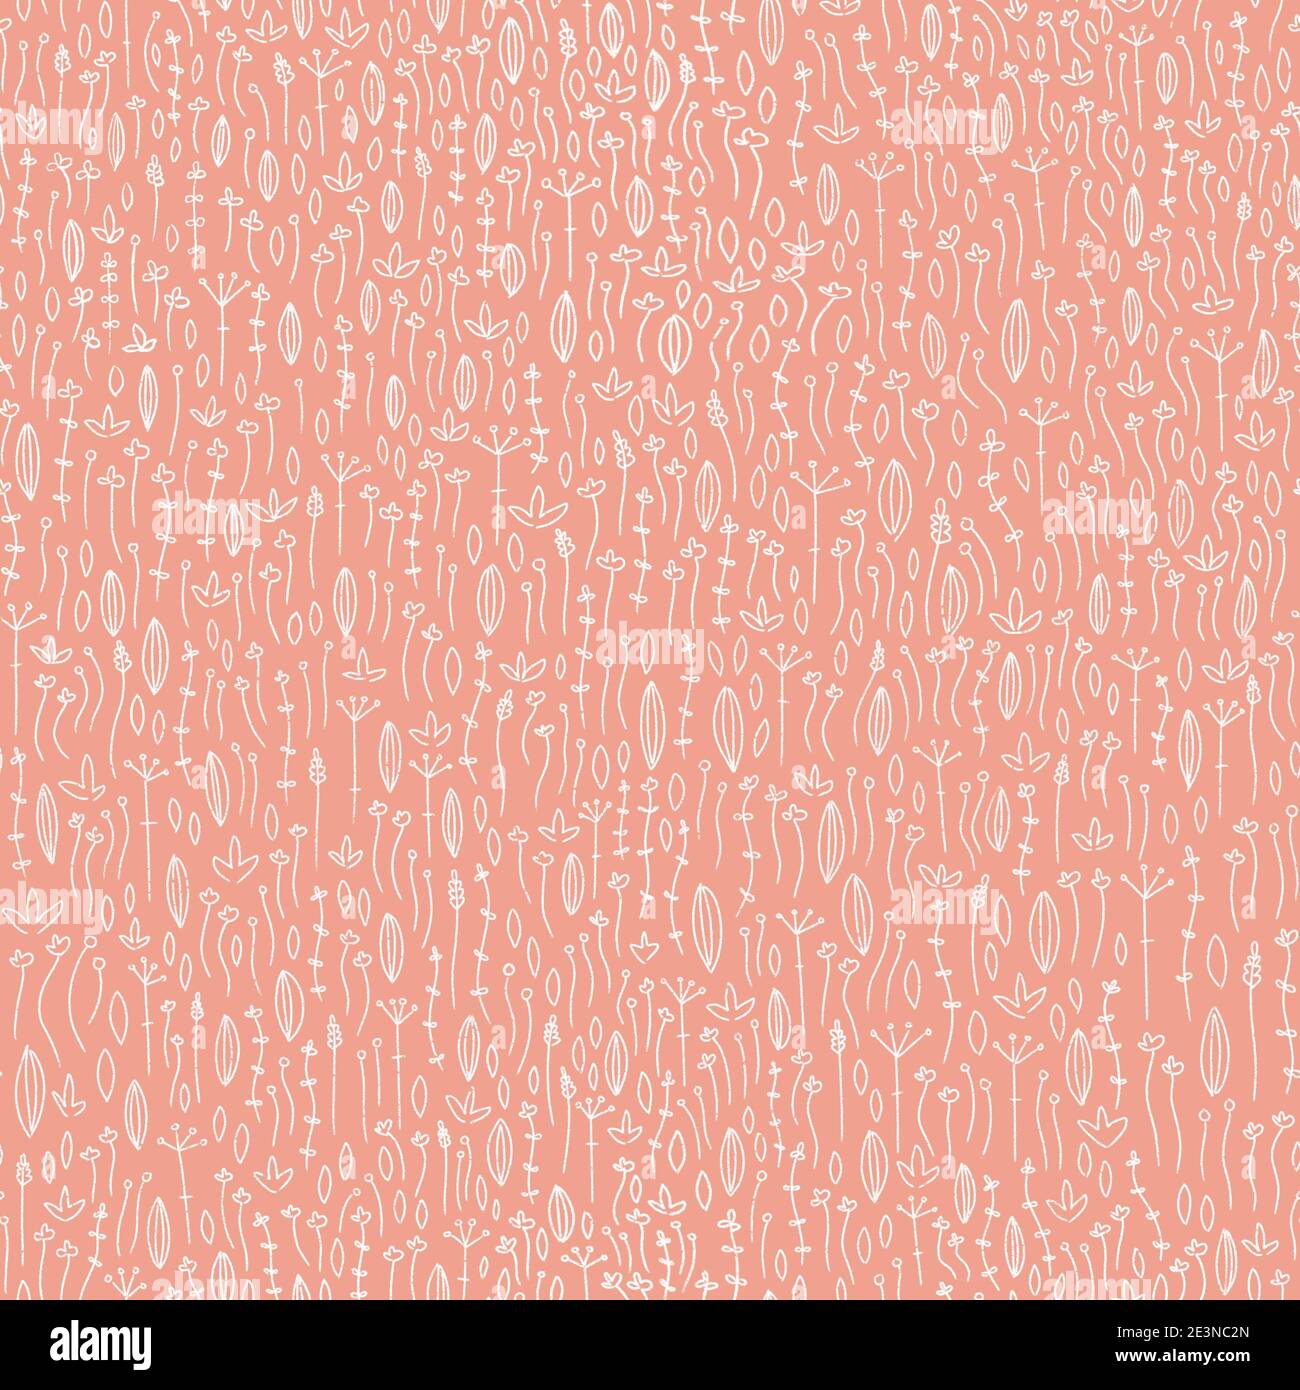 Seamless illustrated pattern. Floral repeating background. Stock Photo